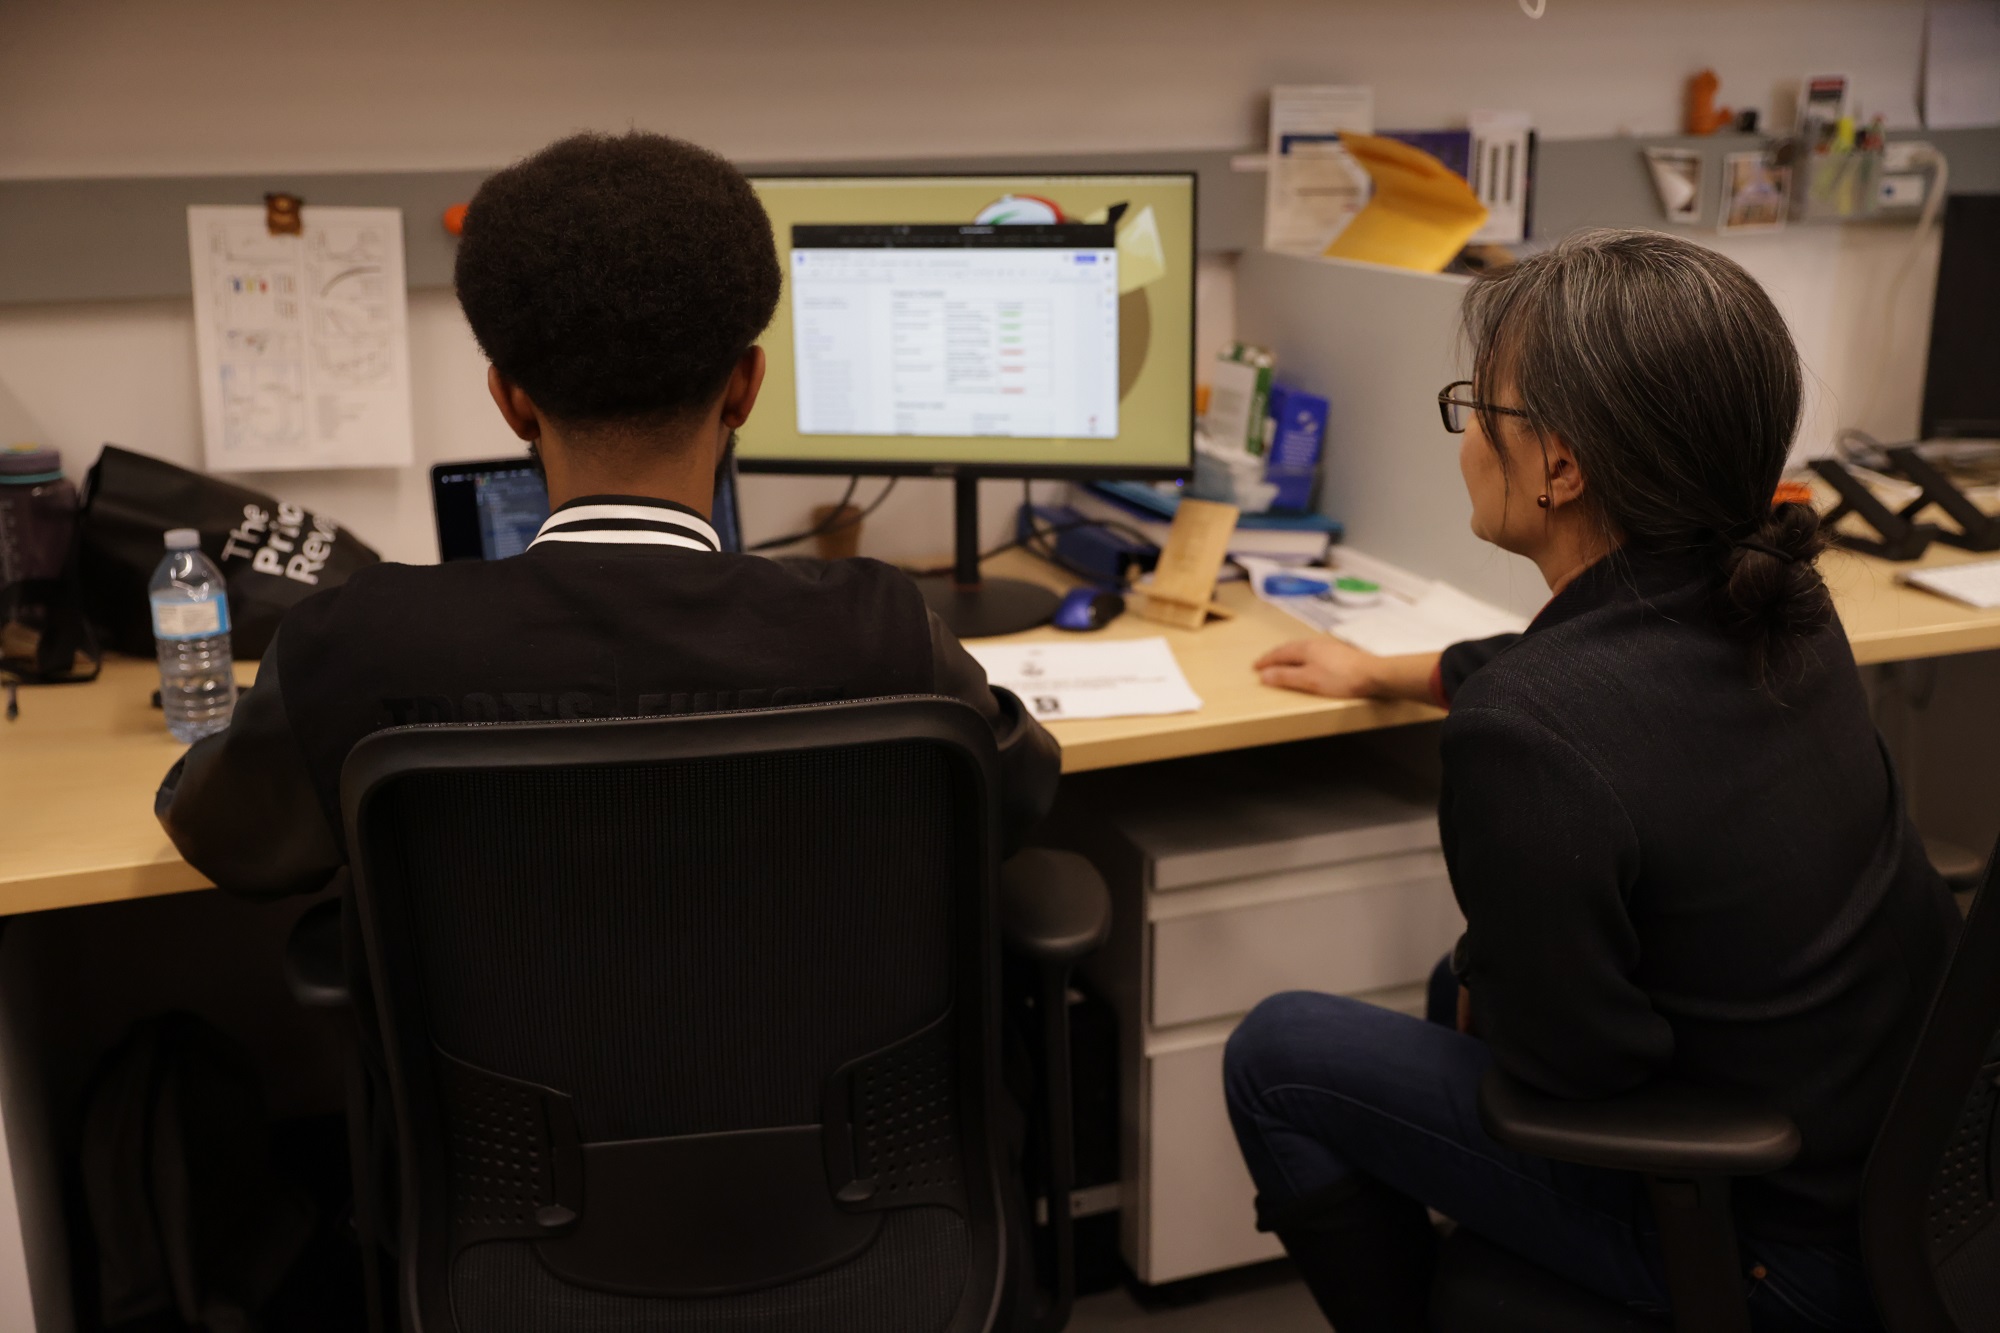 Student working with a supervisor. Both looking at a computer screen.